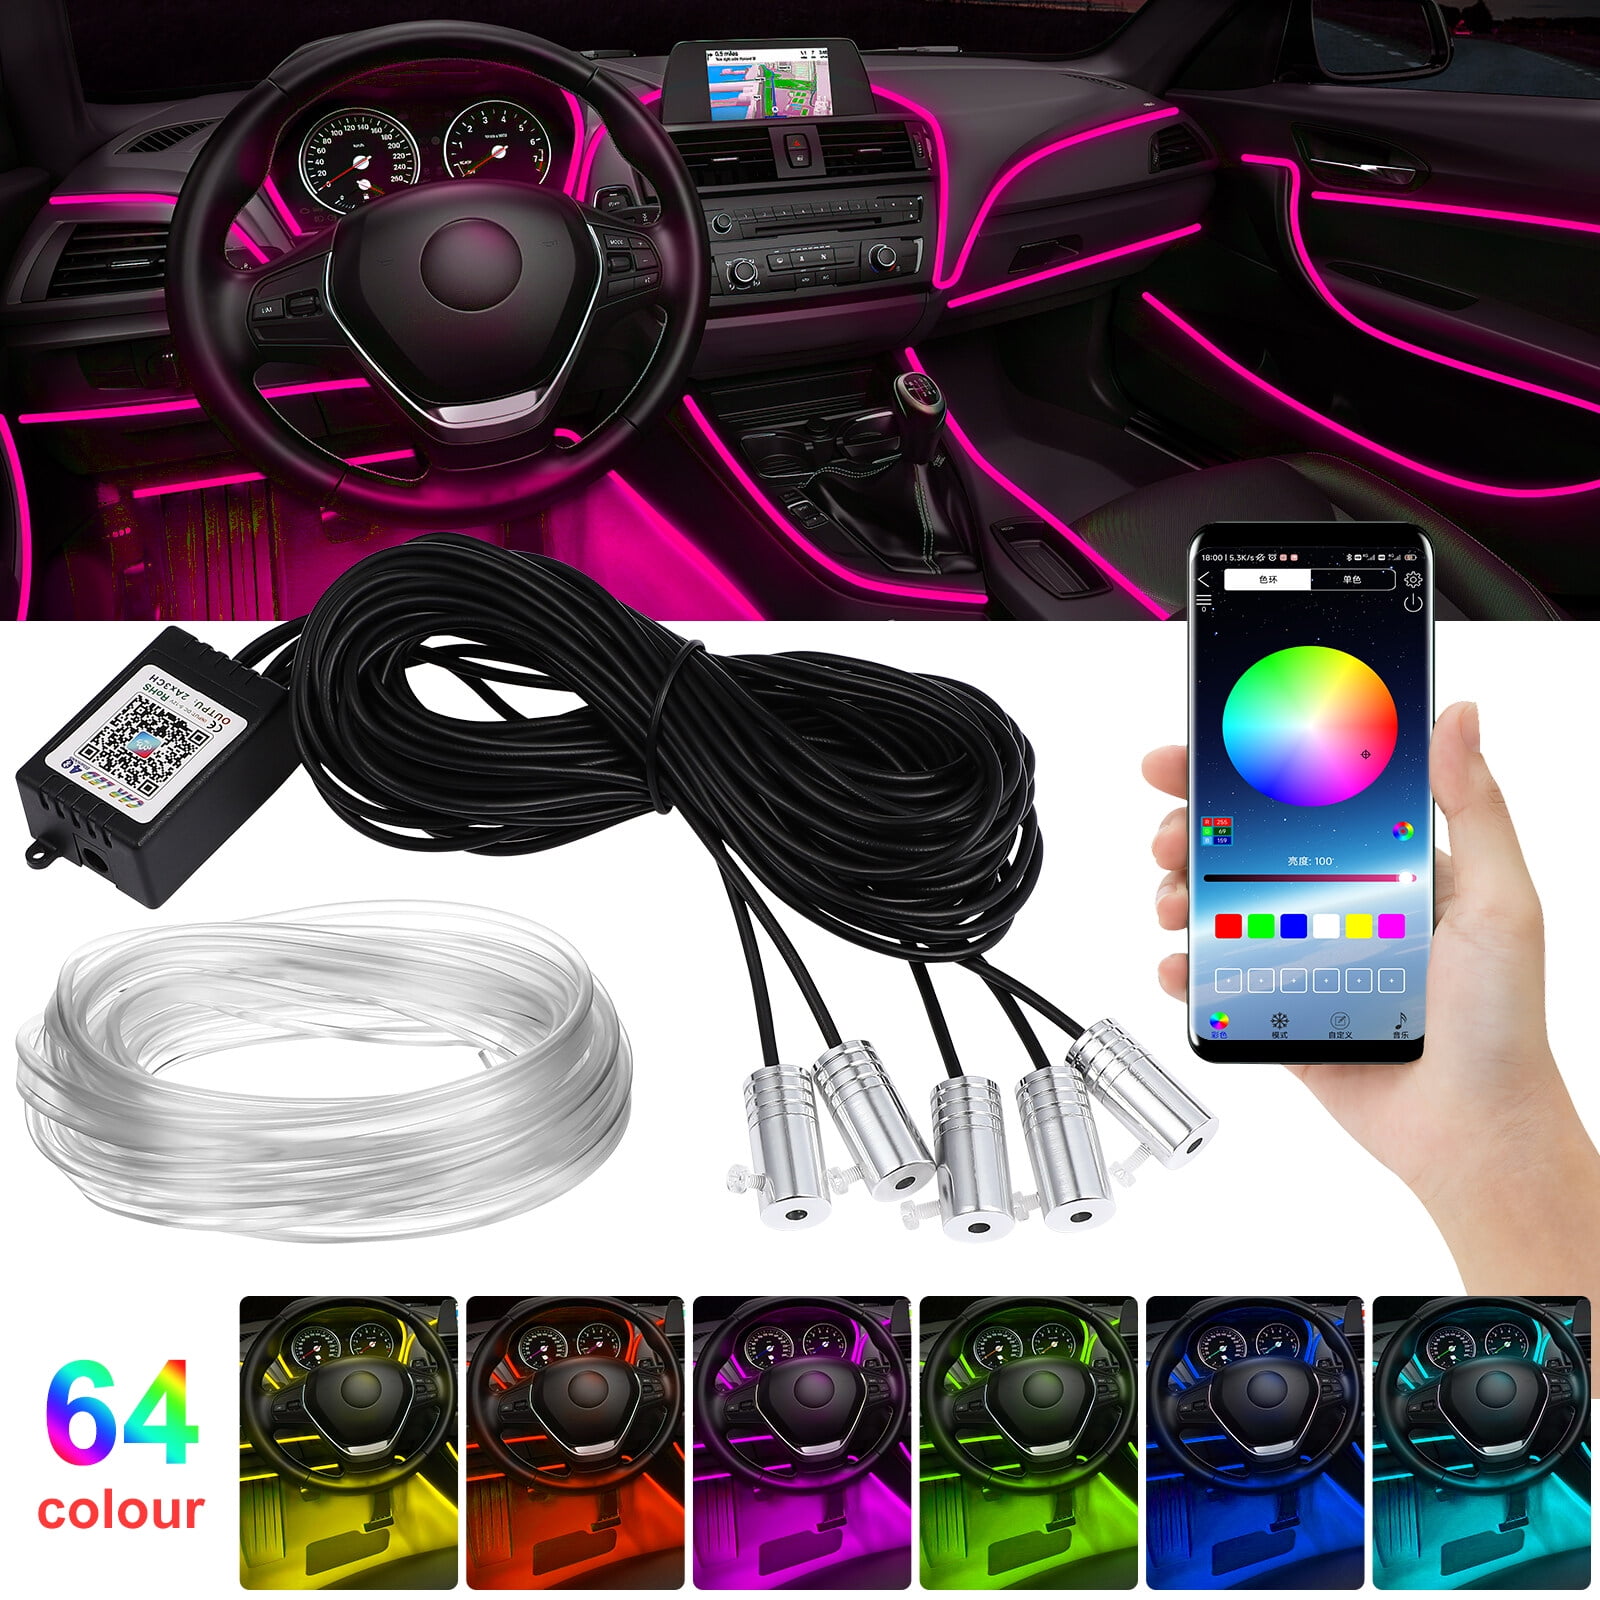  Interior Car LED Strip Lights, 6 in 1 Multicolor RGB Car Neon Ambient  Lighting Kits Fiber Optic for Truck SUV, 16 Million Colors Sound Active  Function and Wireless Bluetooth APP Control : Automotive